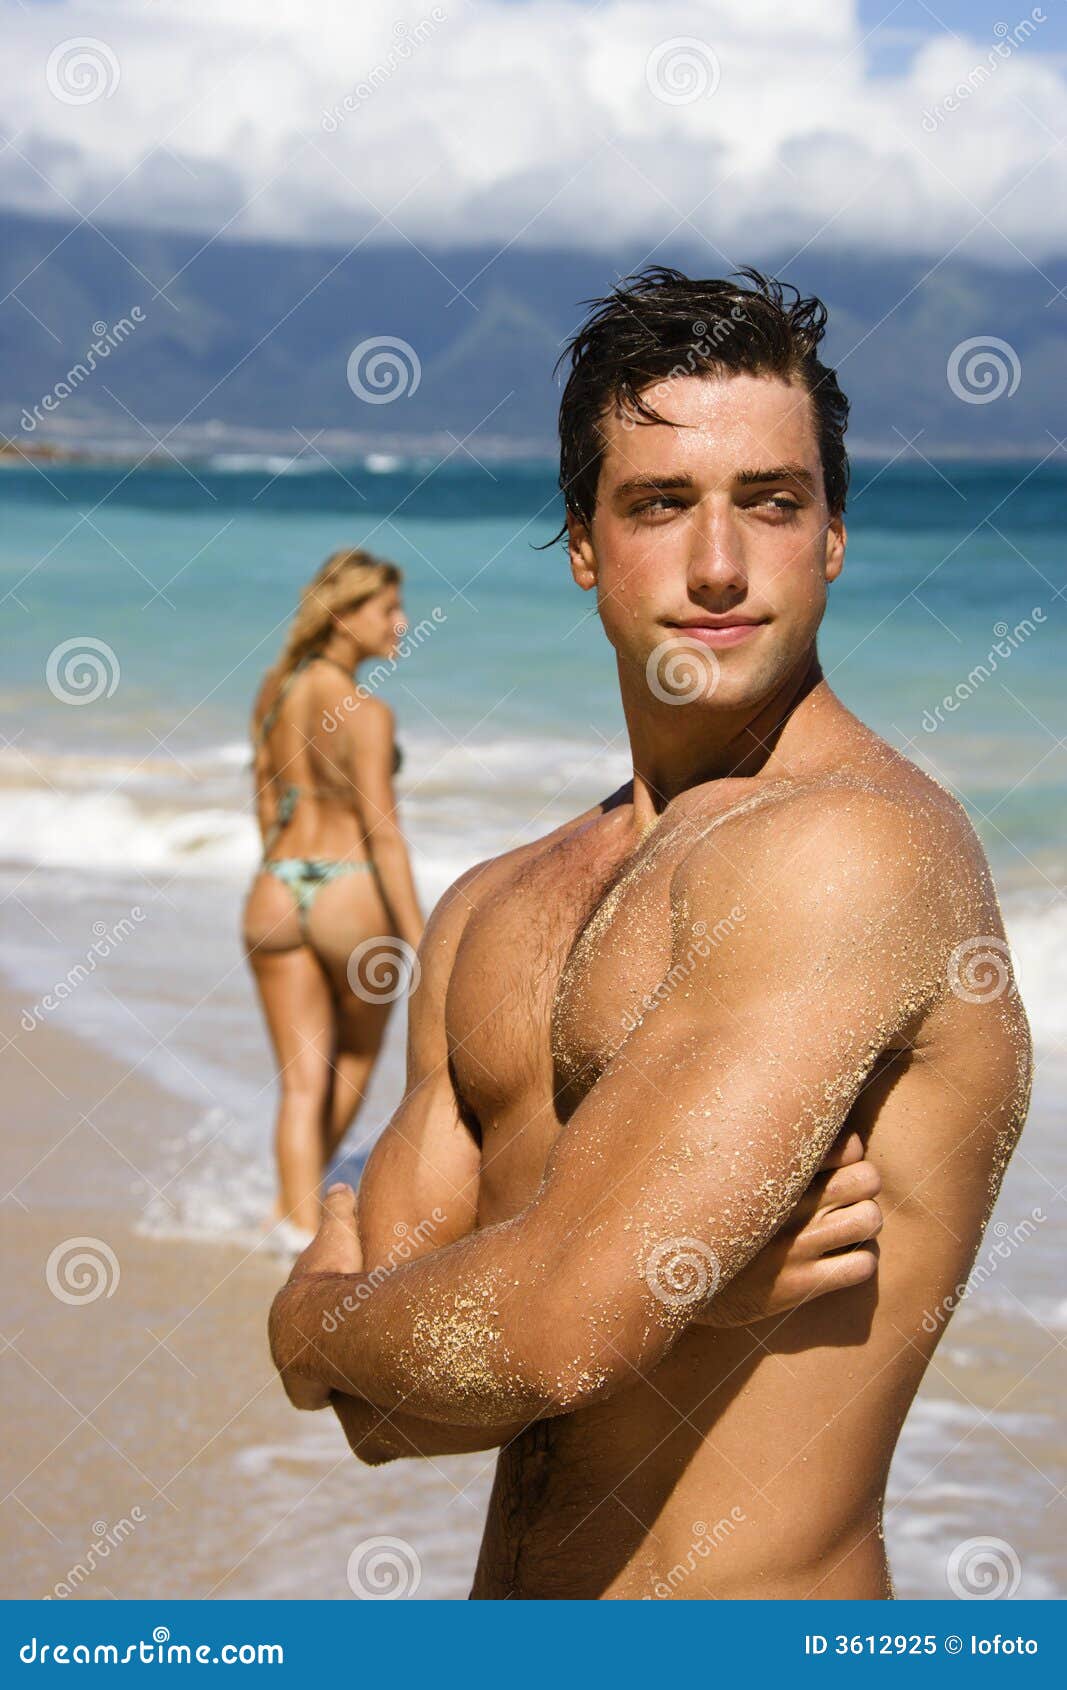 Man posing on beach picture